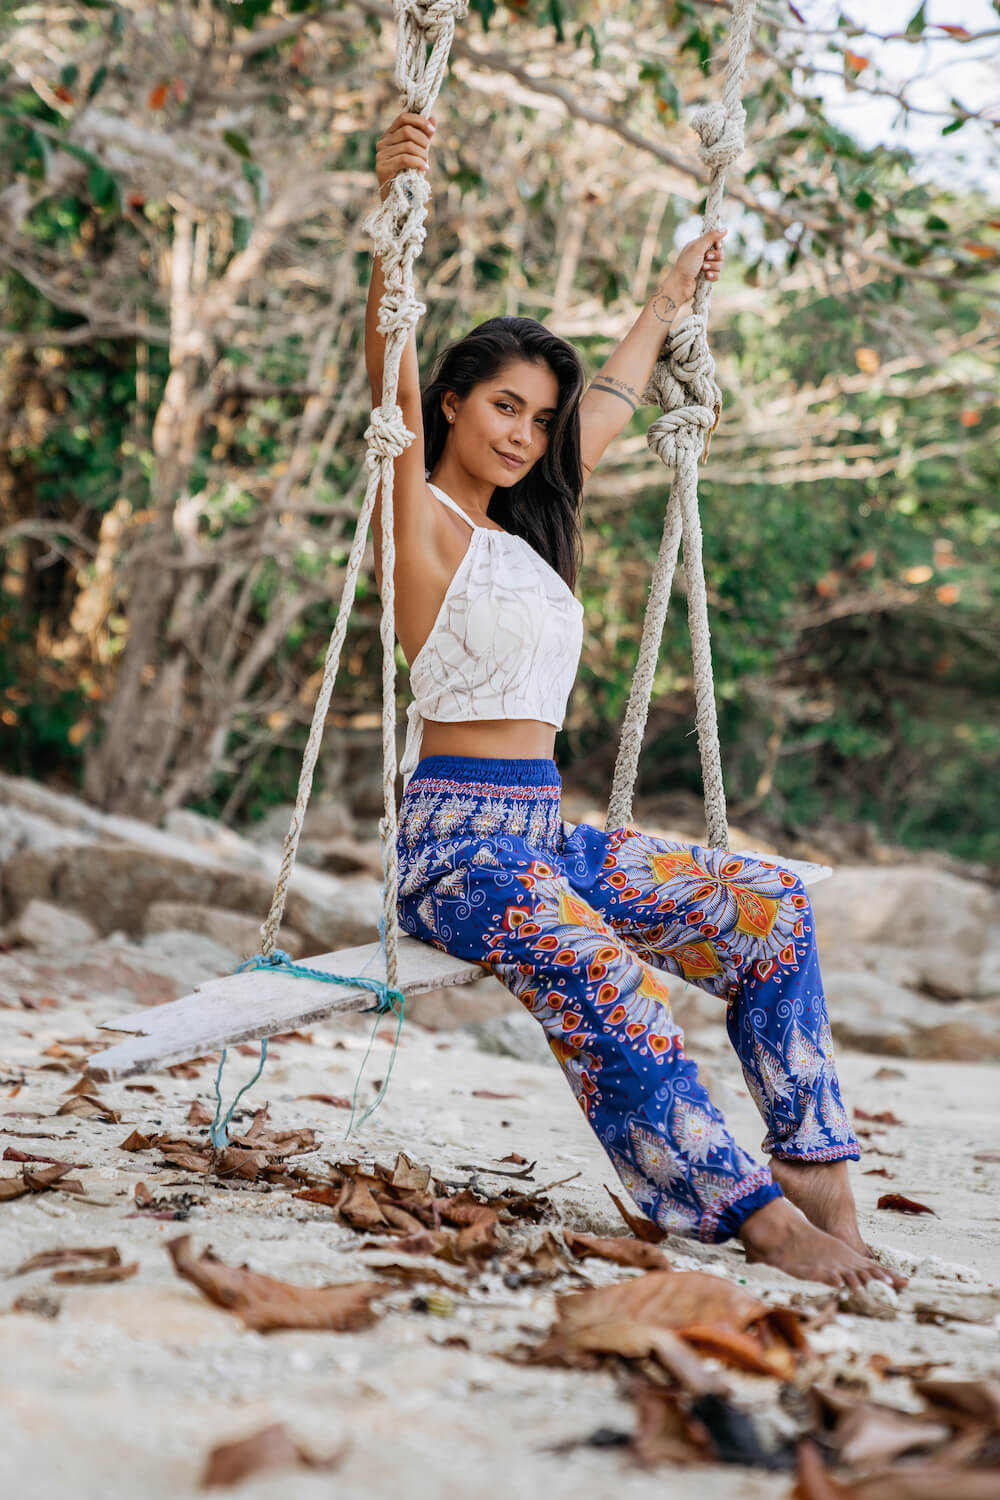 Blue Blossom Harem Pants from Bohemian Island's Spring 2019 Collection